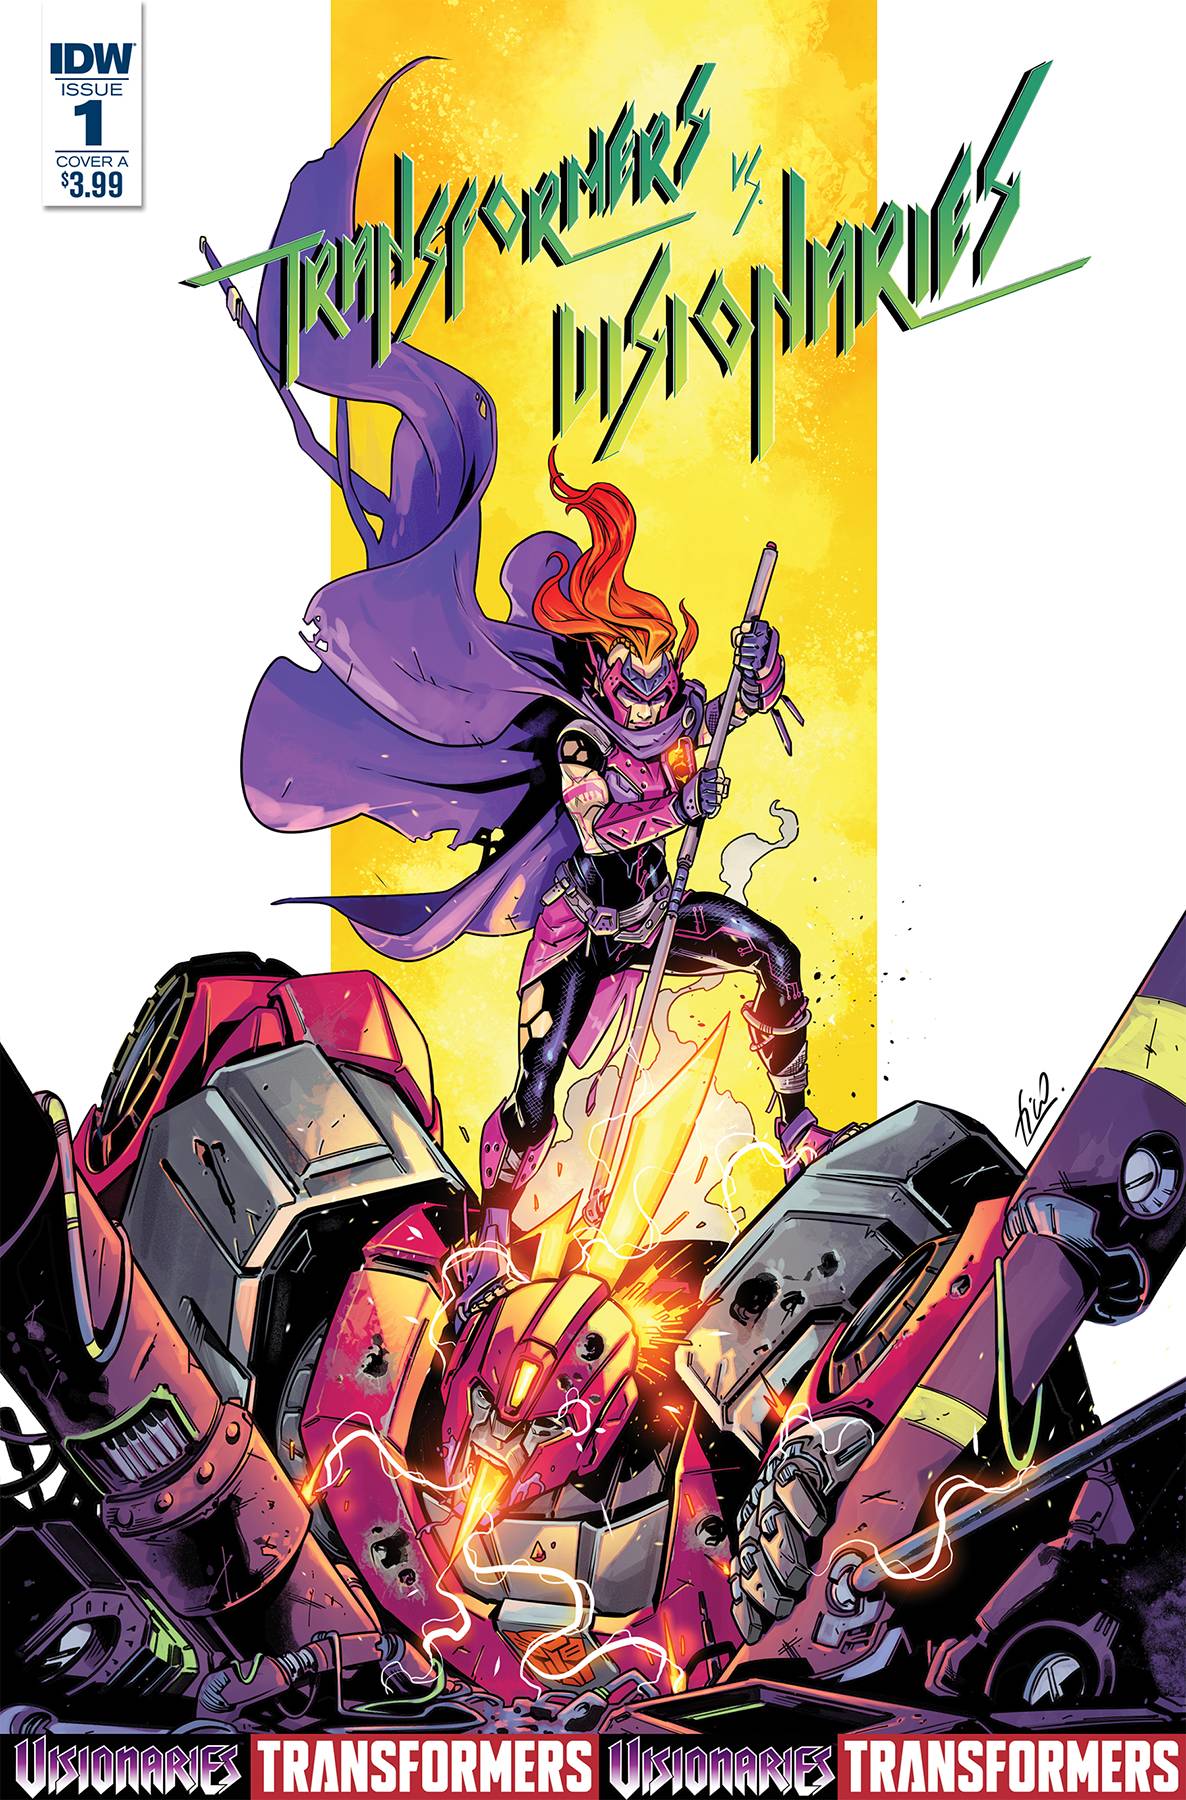 Transformers Vs The Visionaries #1 Cover A Ossio (Of 5)